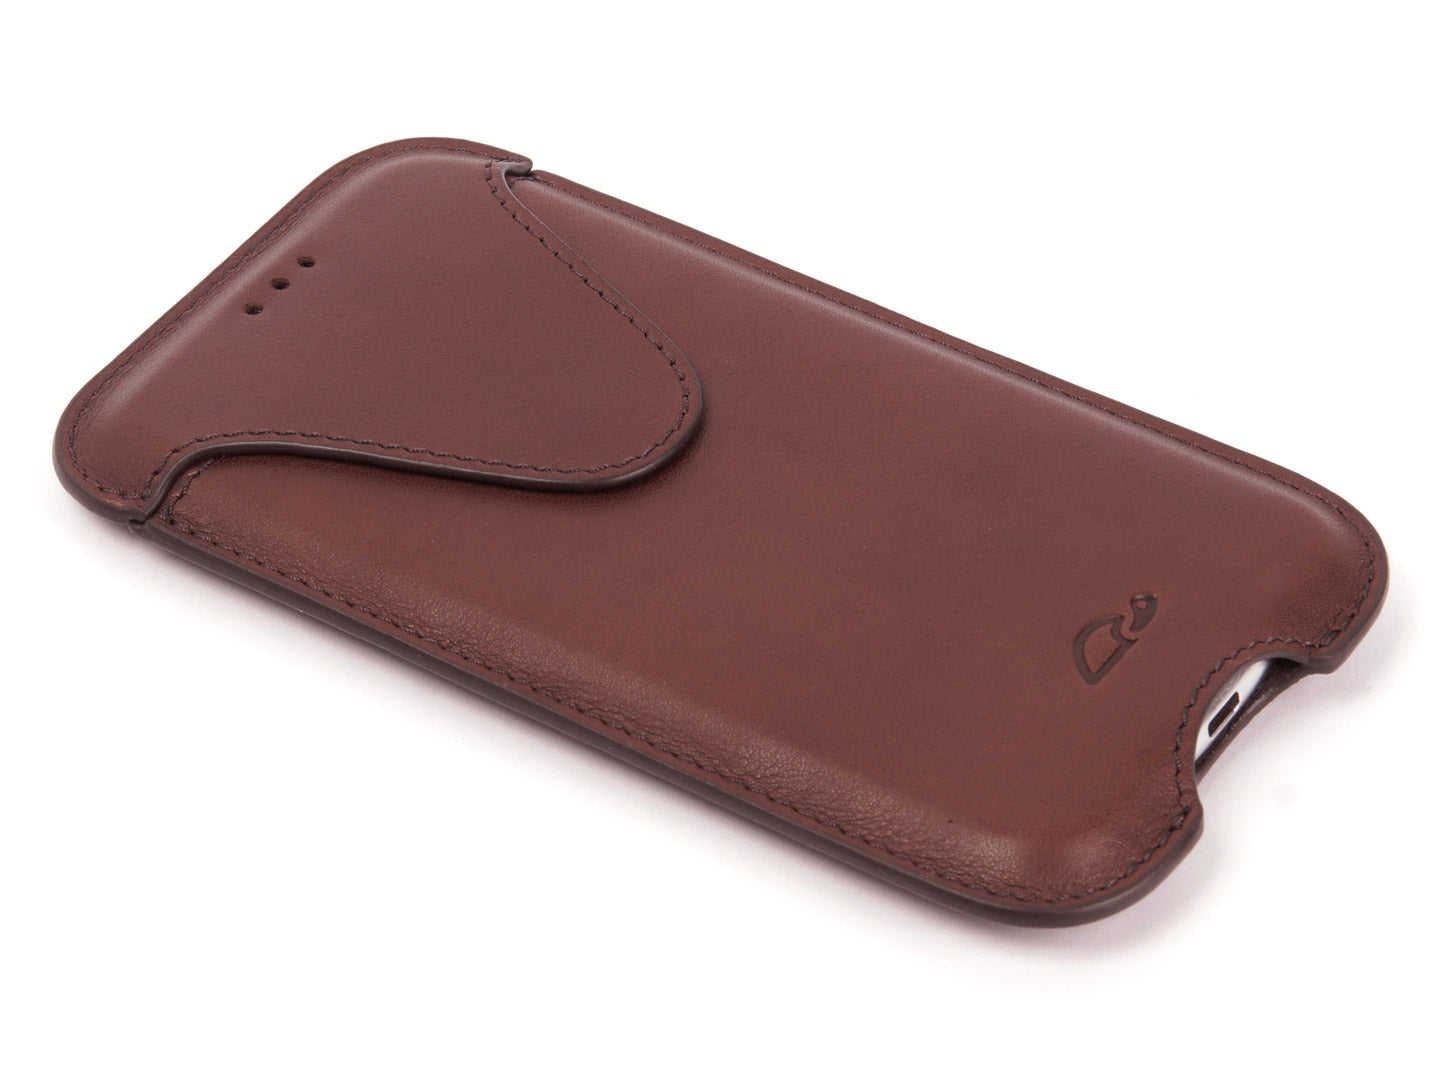 iPhone X / Xs / 11 Pro Leather Pouch - Protective Sleeve Case - Brown Natural Leather - side - Carapaz